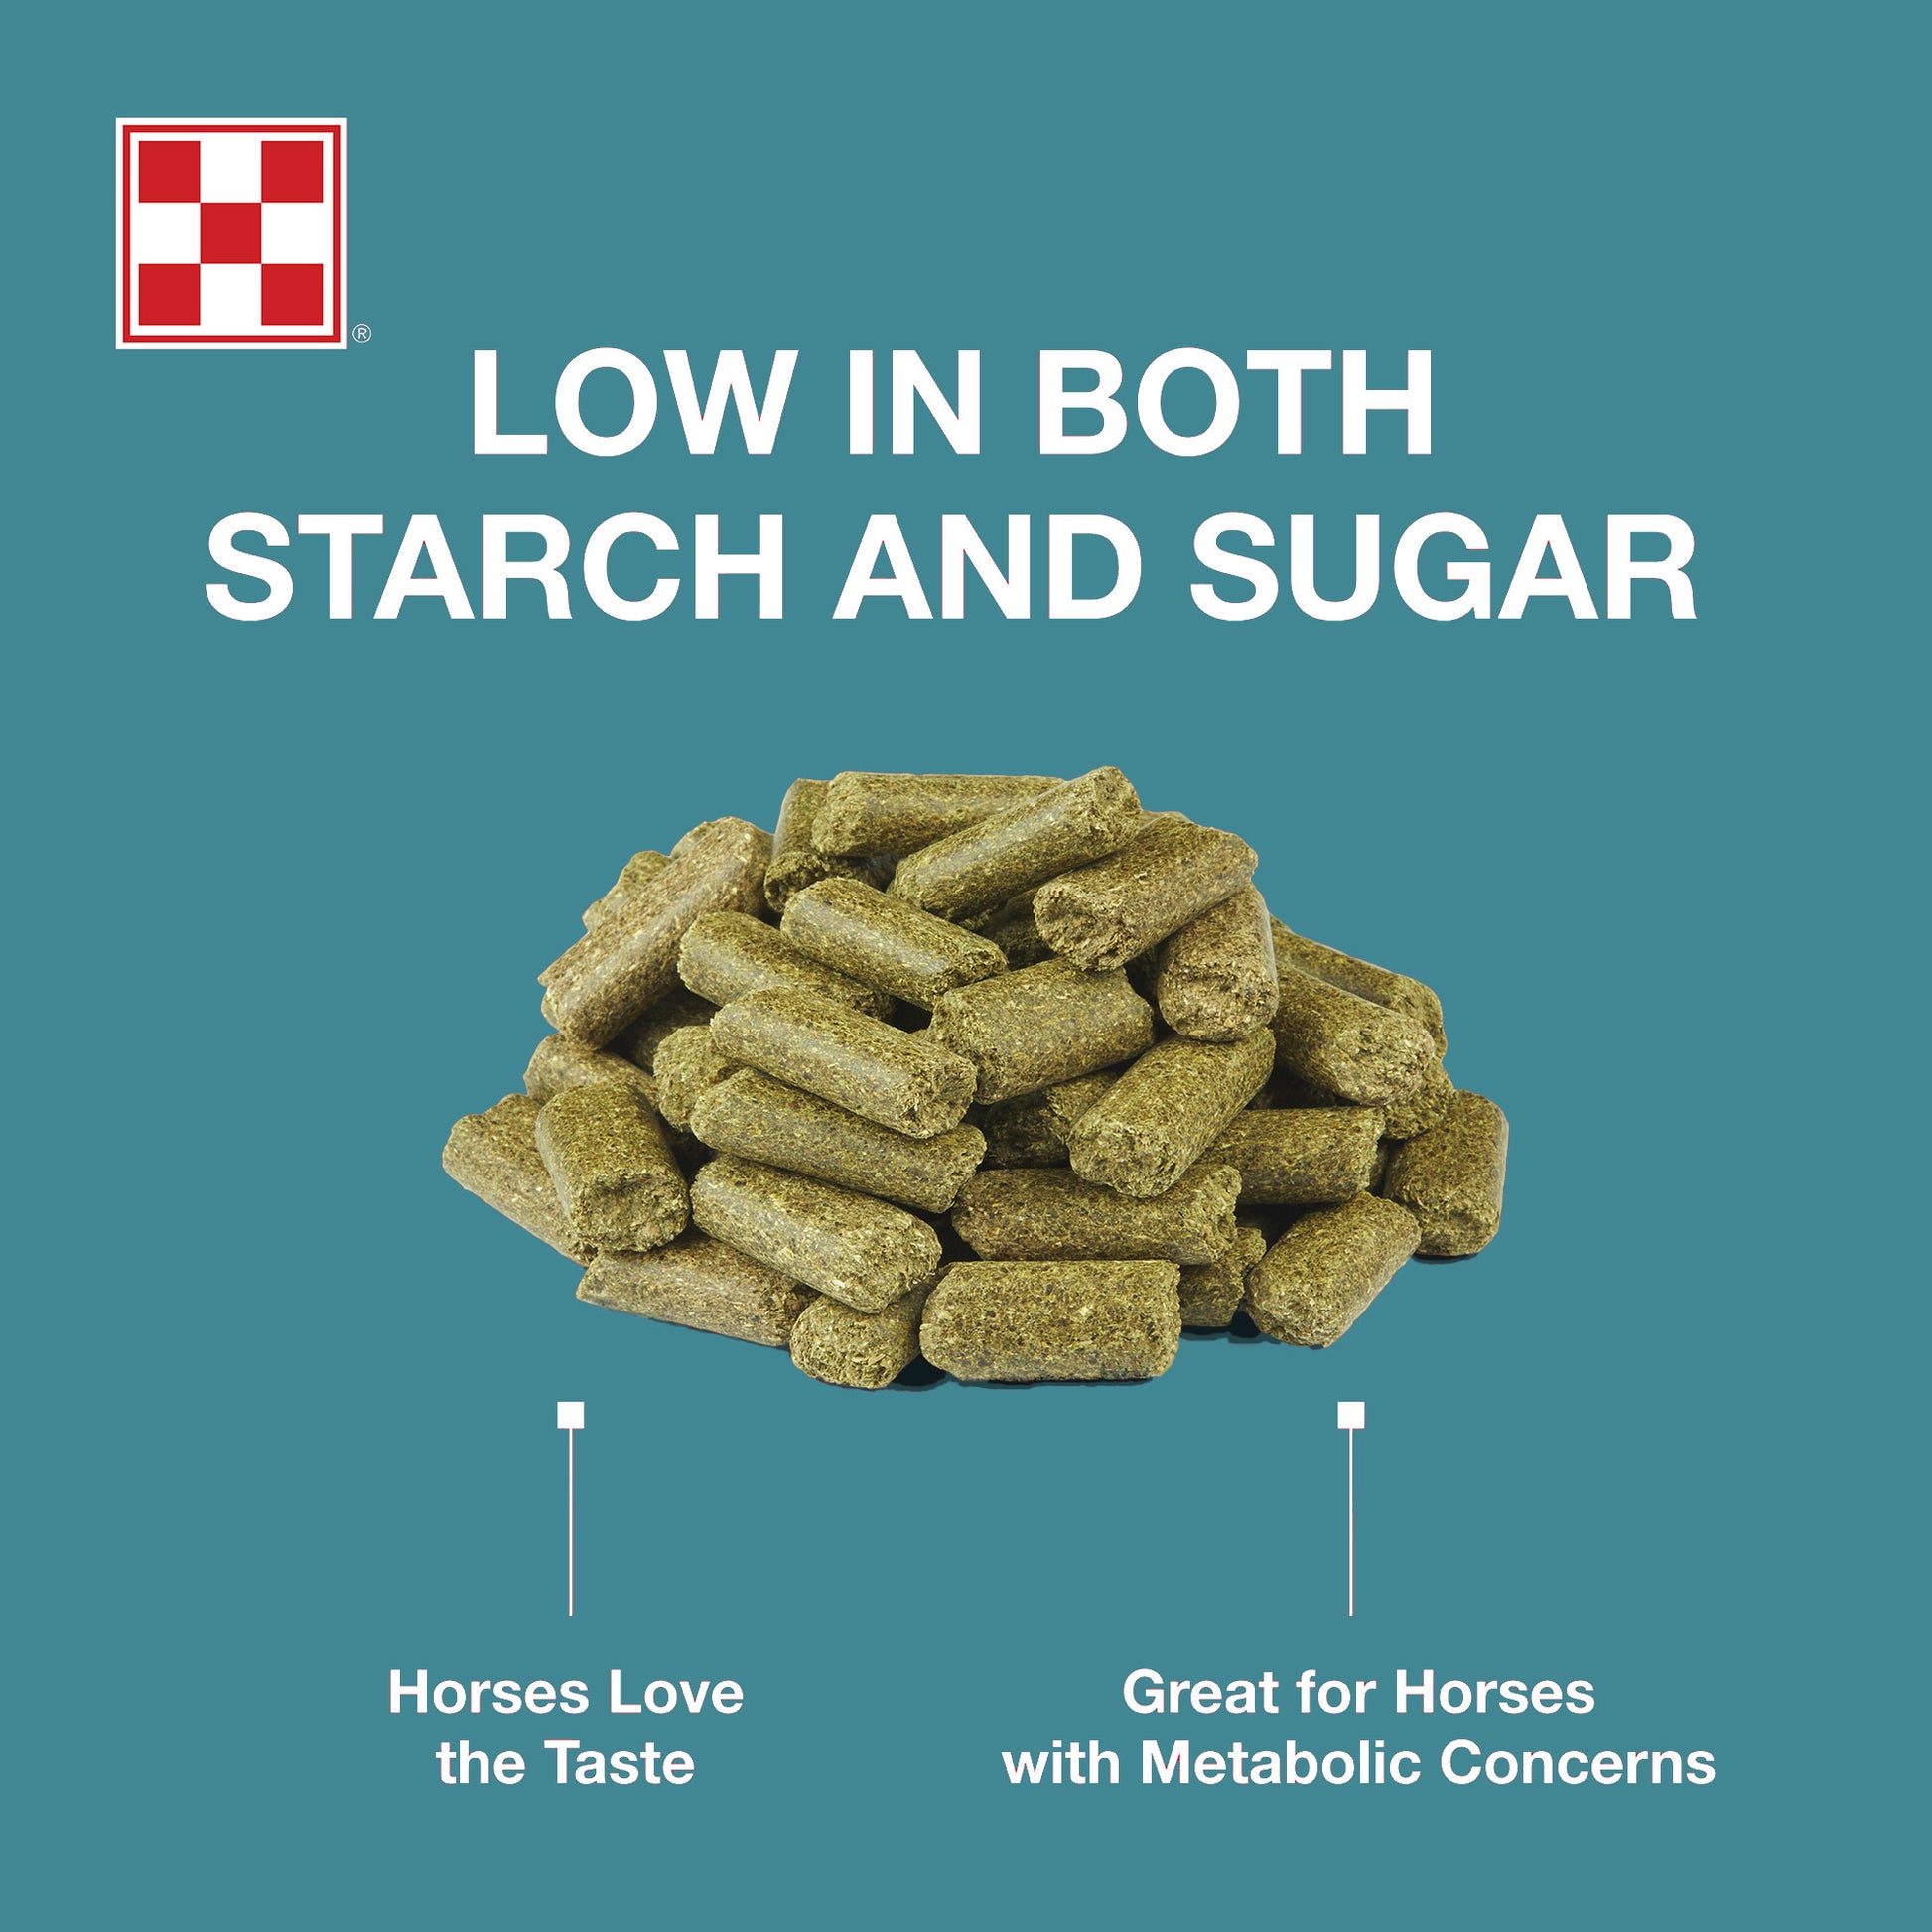 Low in both starch and sugar